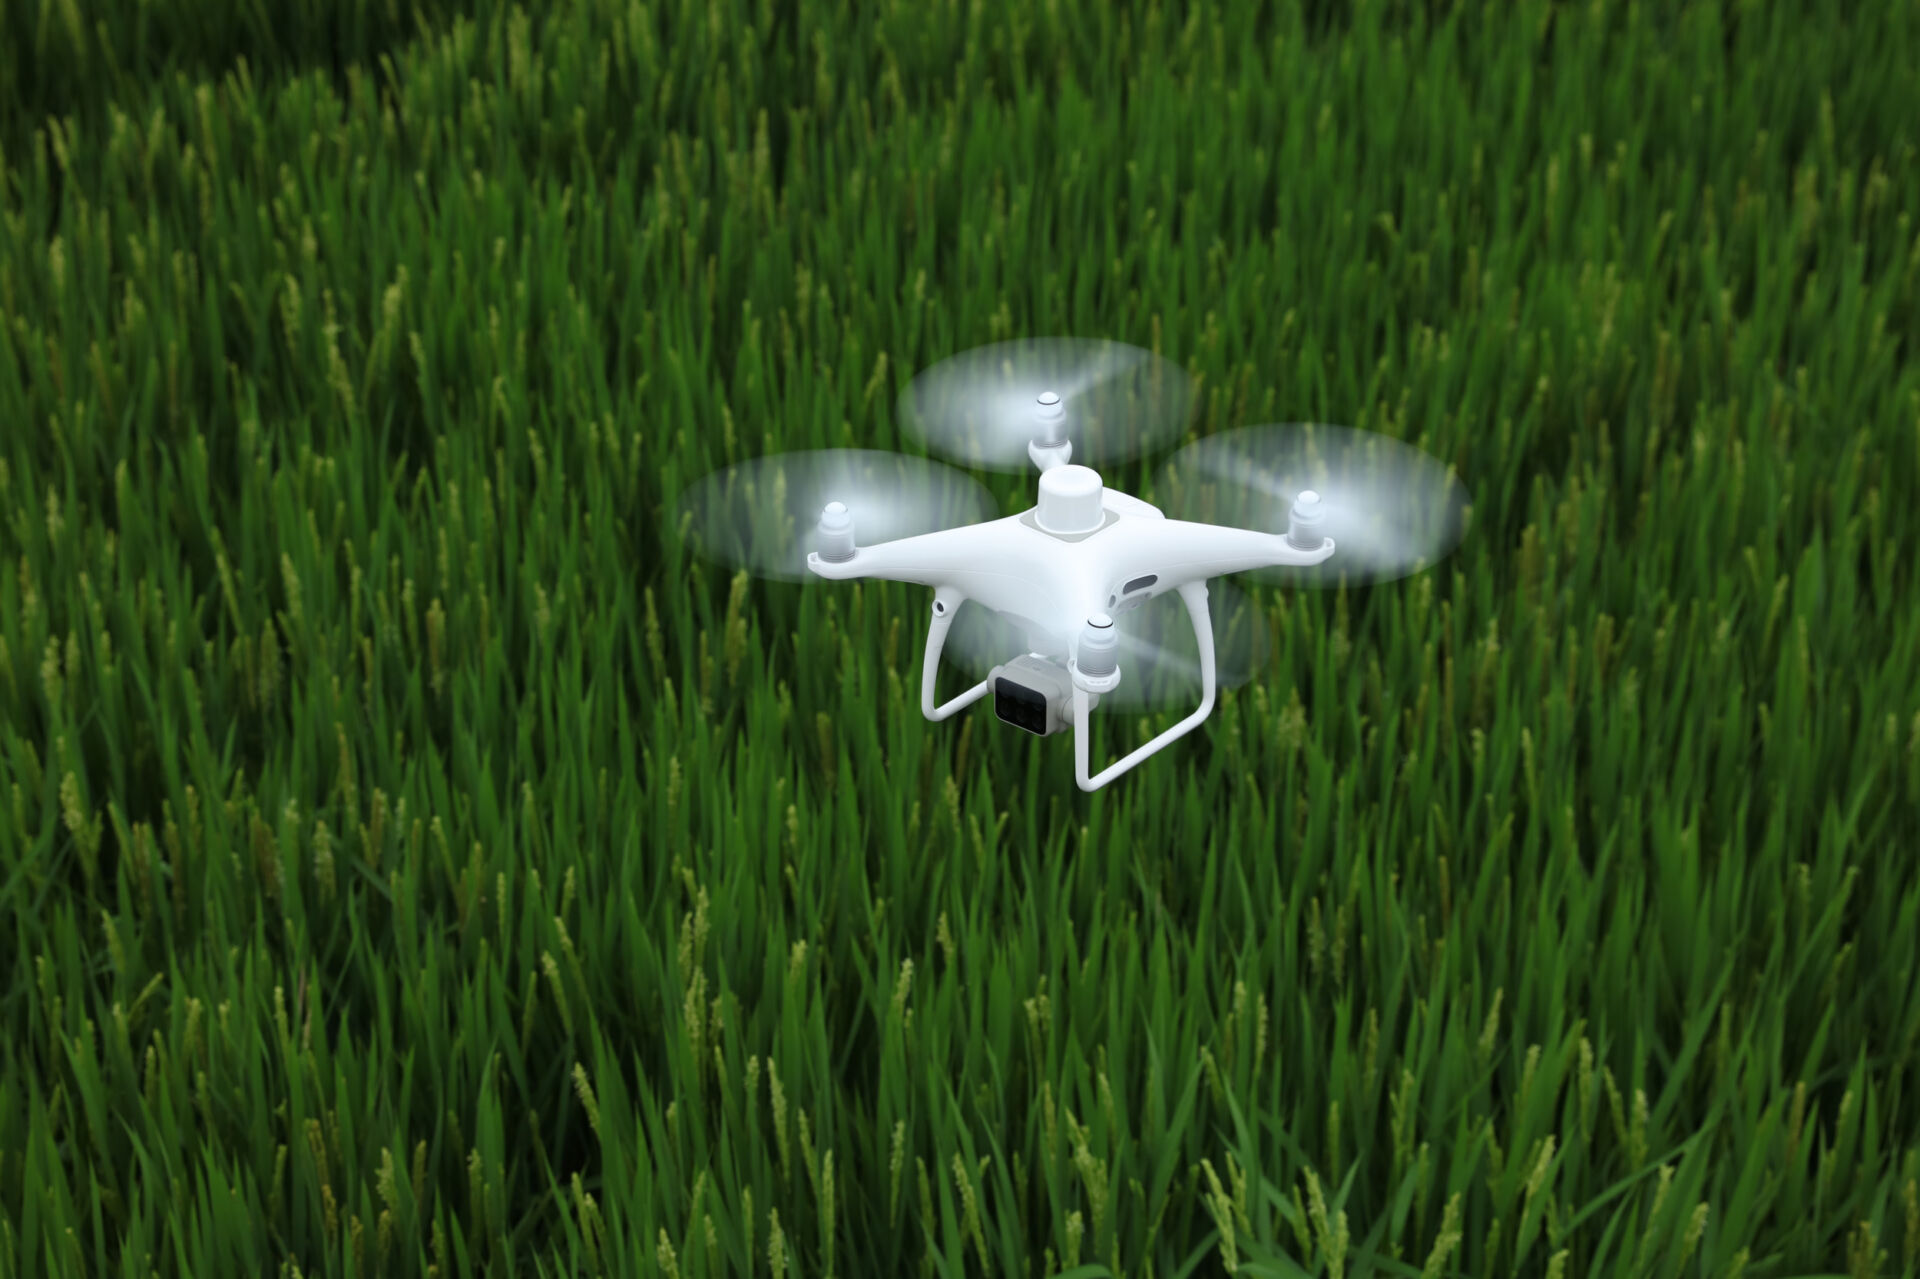 P4 Multispectral drone at work over field of green grass farmer